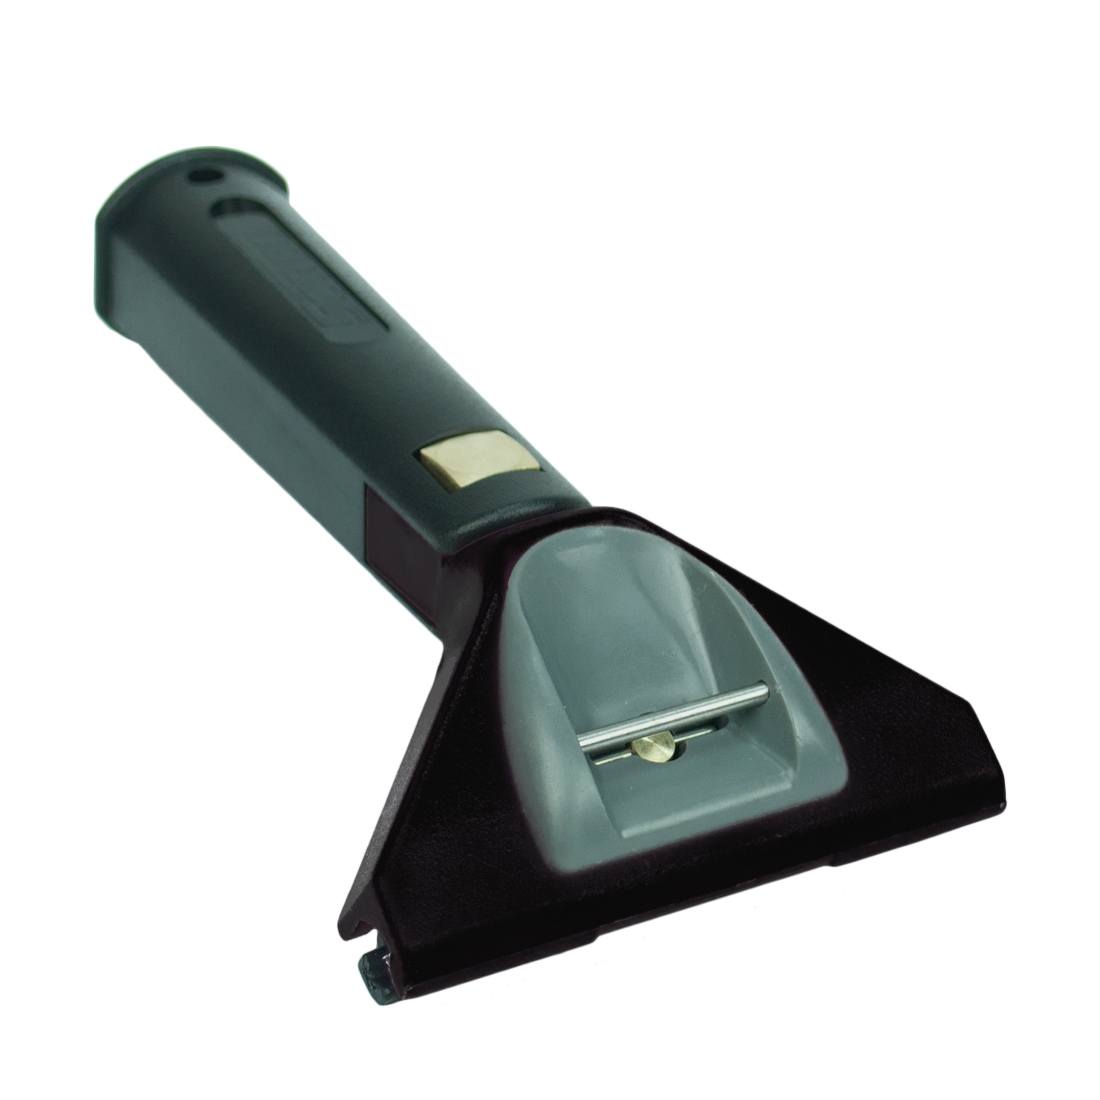 Left hand squeegee door casting 275-7669 – Ships Fast from Our